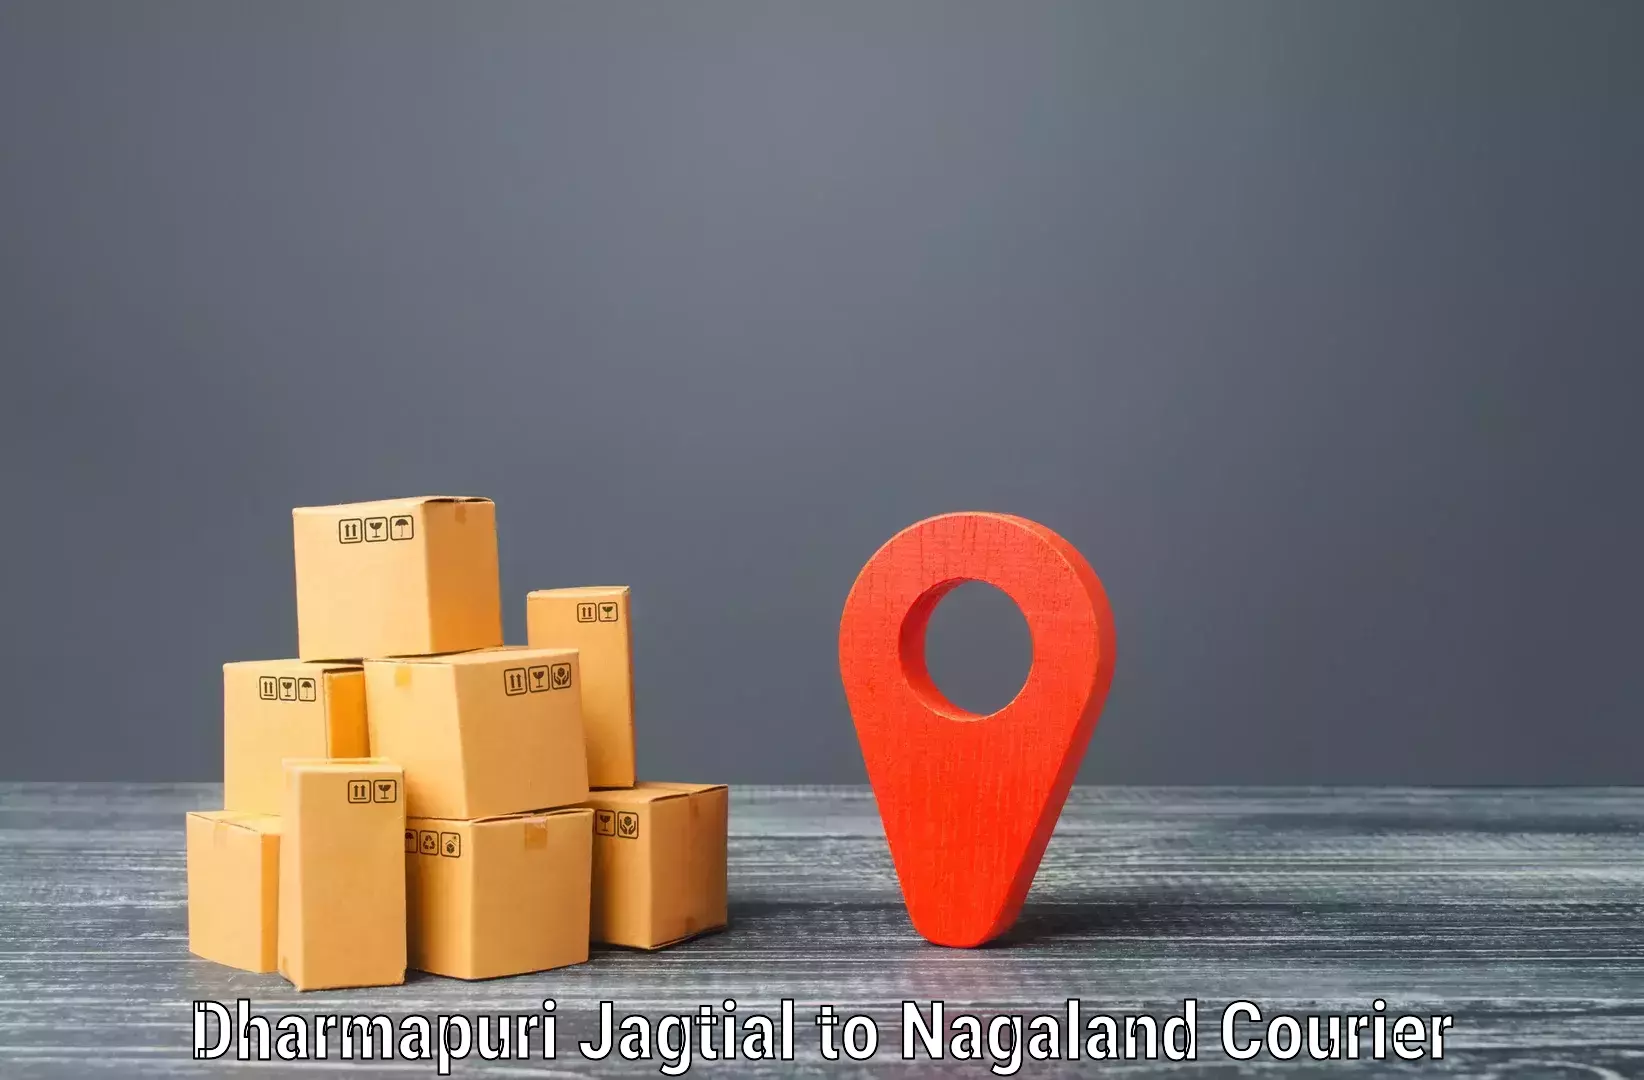 Tailored freight services Dharmapuri Jagtial to Nagaland